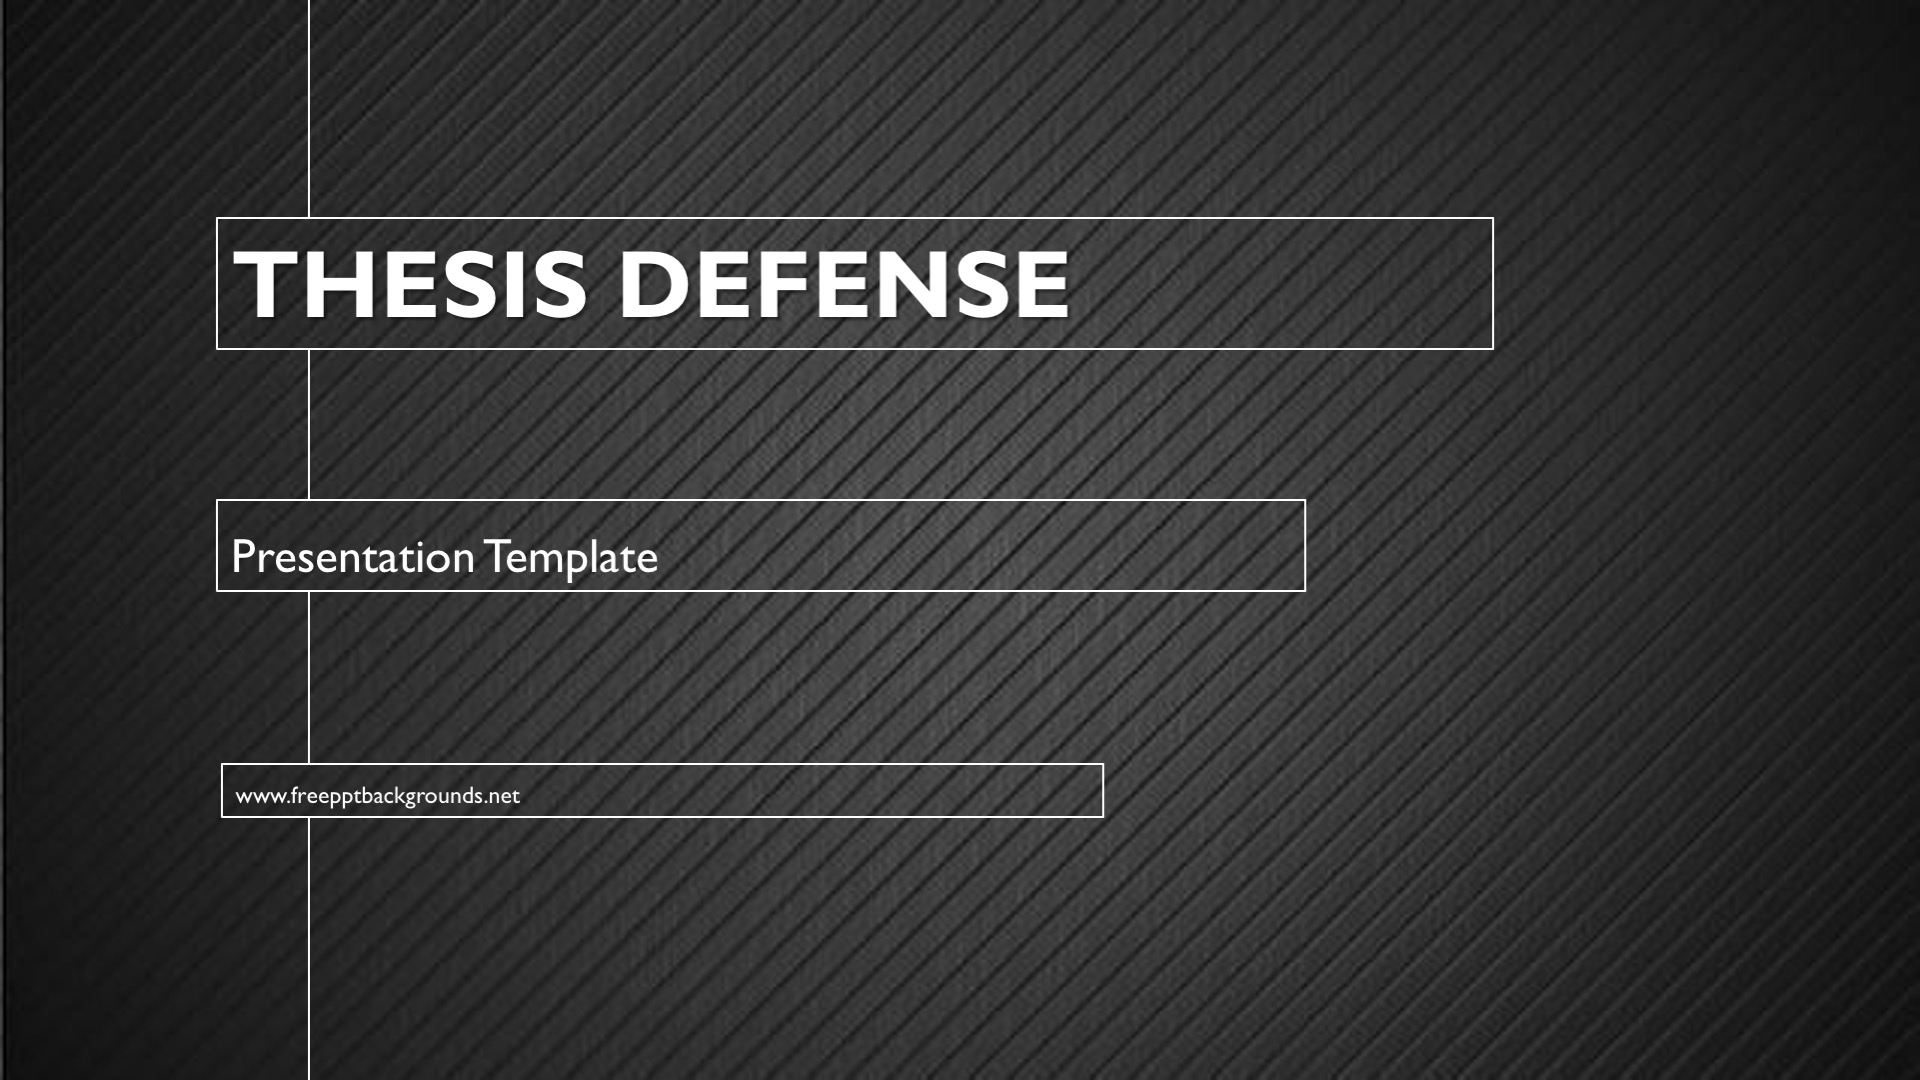 thesis defense ppt background